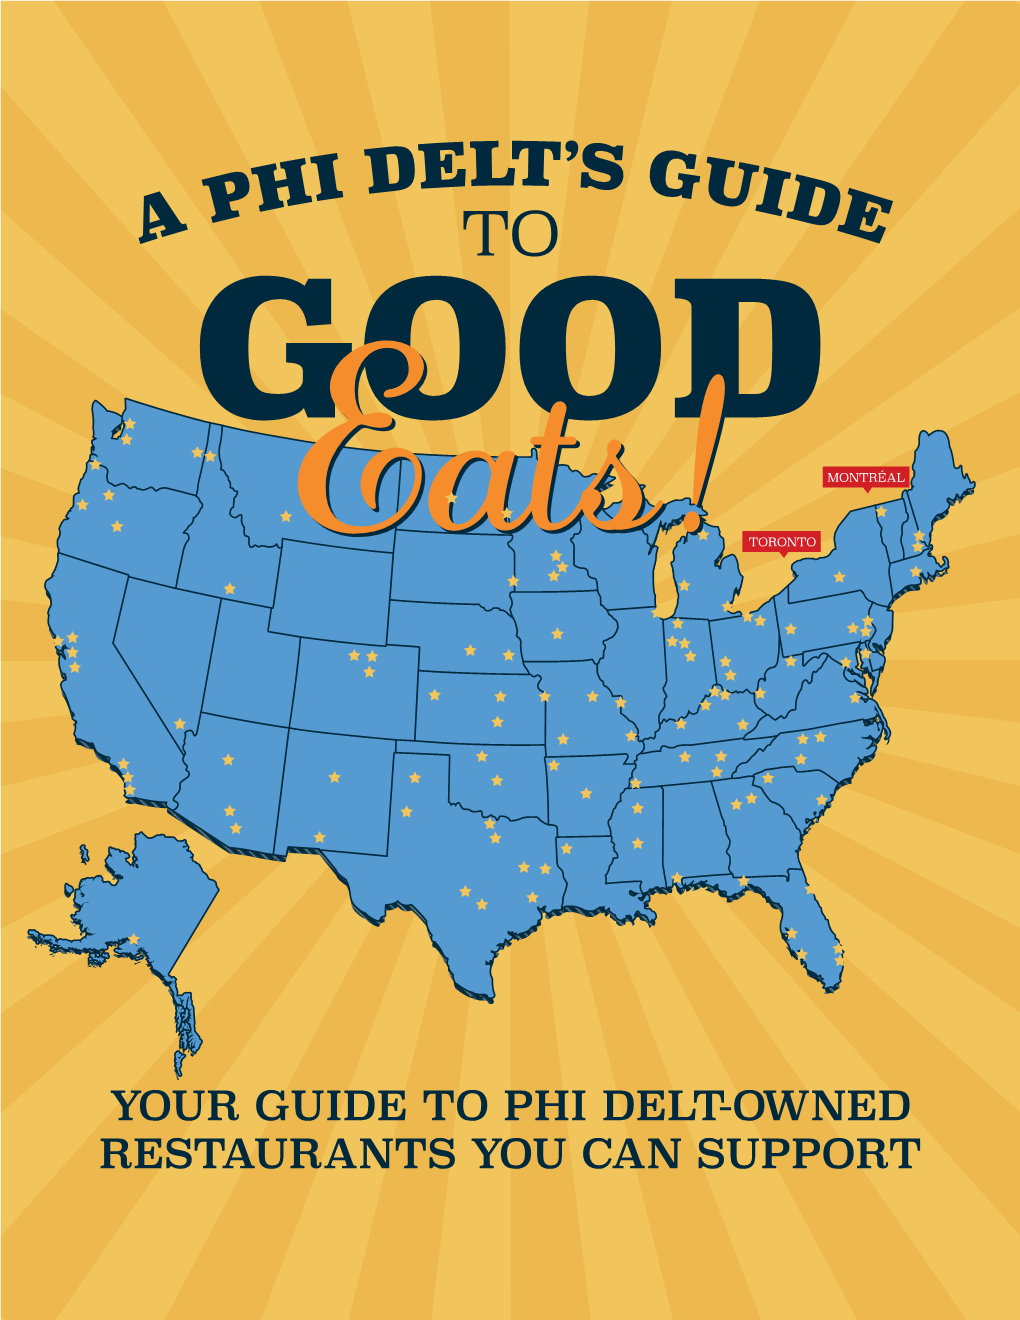 YOUR GUIDE to PHI DELT-OWNED RESTAURANTS YOU CAN SUPPORT RESTAURANT INDEX UNITED STATES the Edison